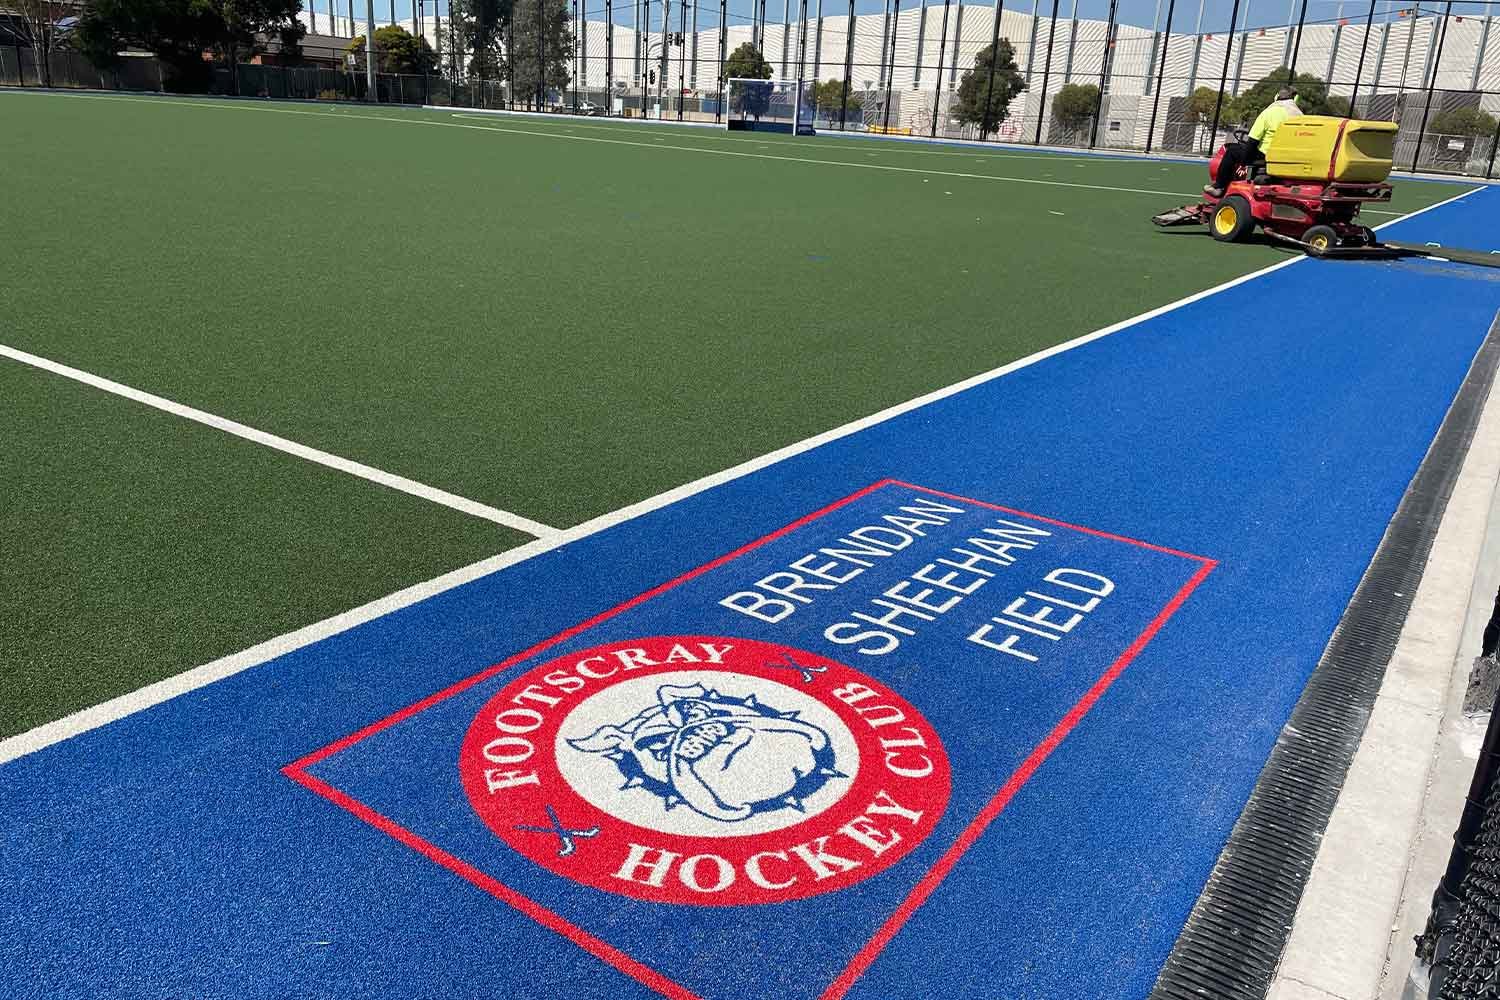 Green and blue synthetic turf surface for an outdoor hockey field with the team logo on it